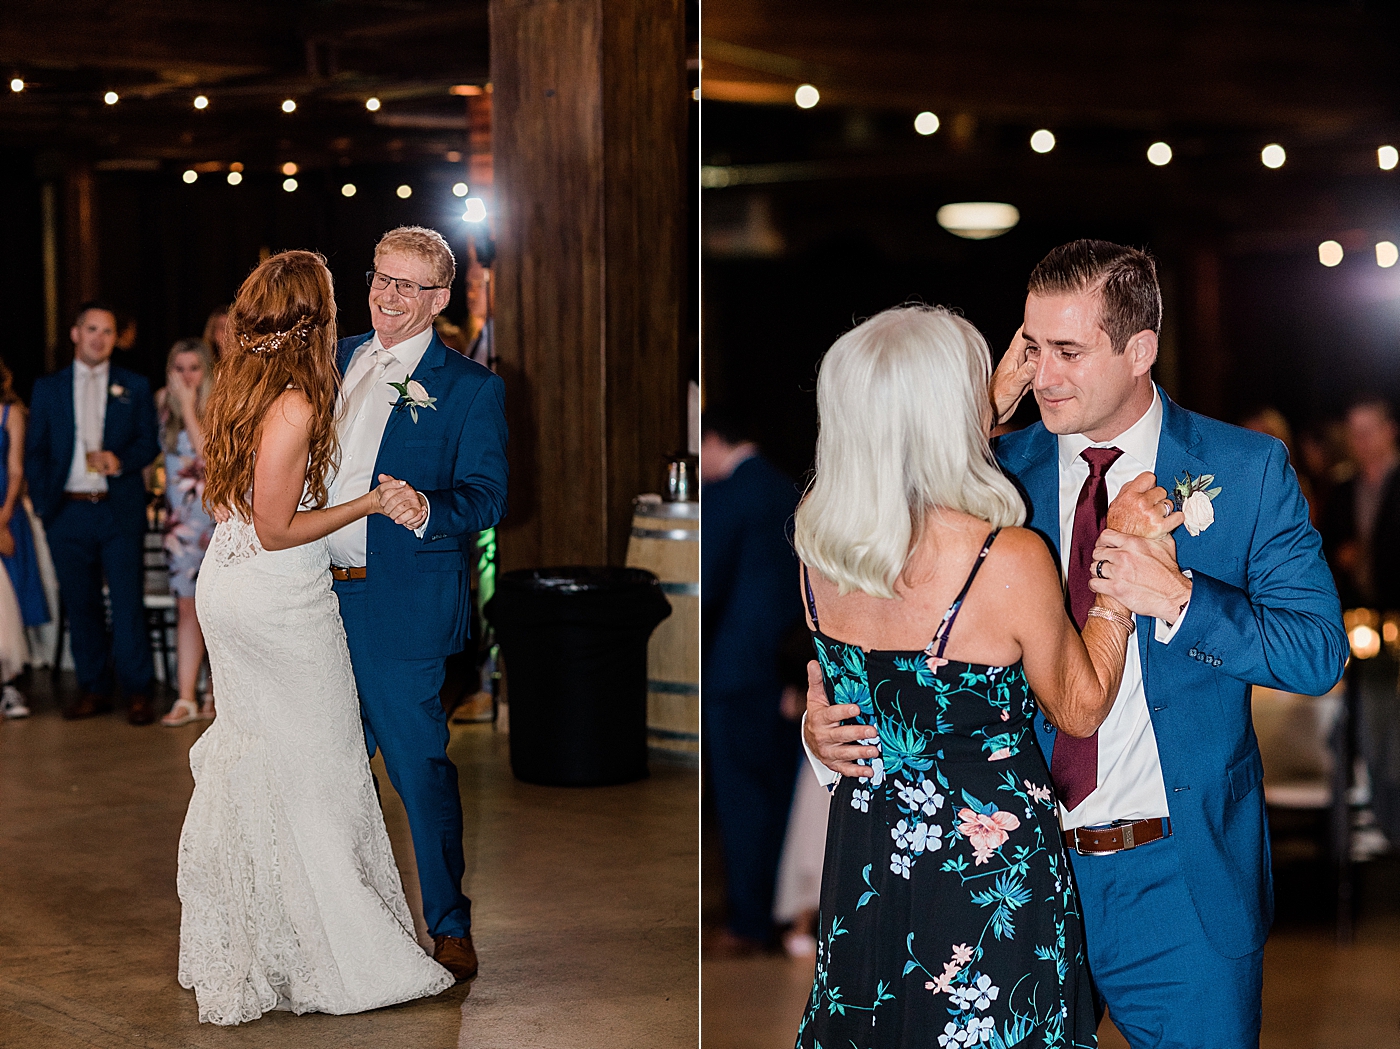 Special first dances at Swiftwater Cellars wedding reception | Megan Montalvo Photography